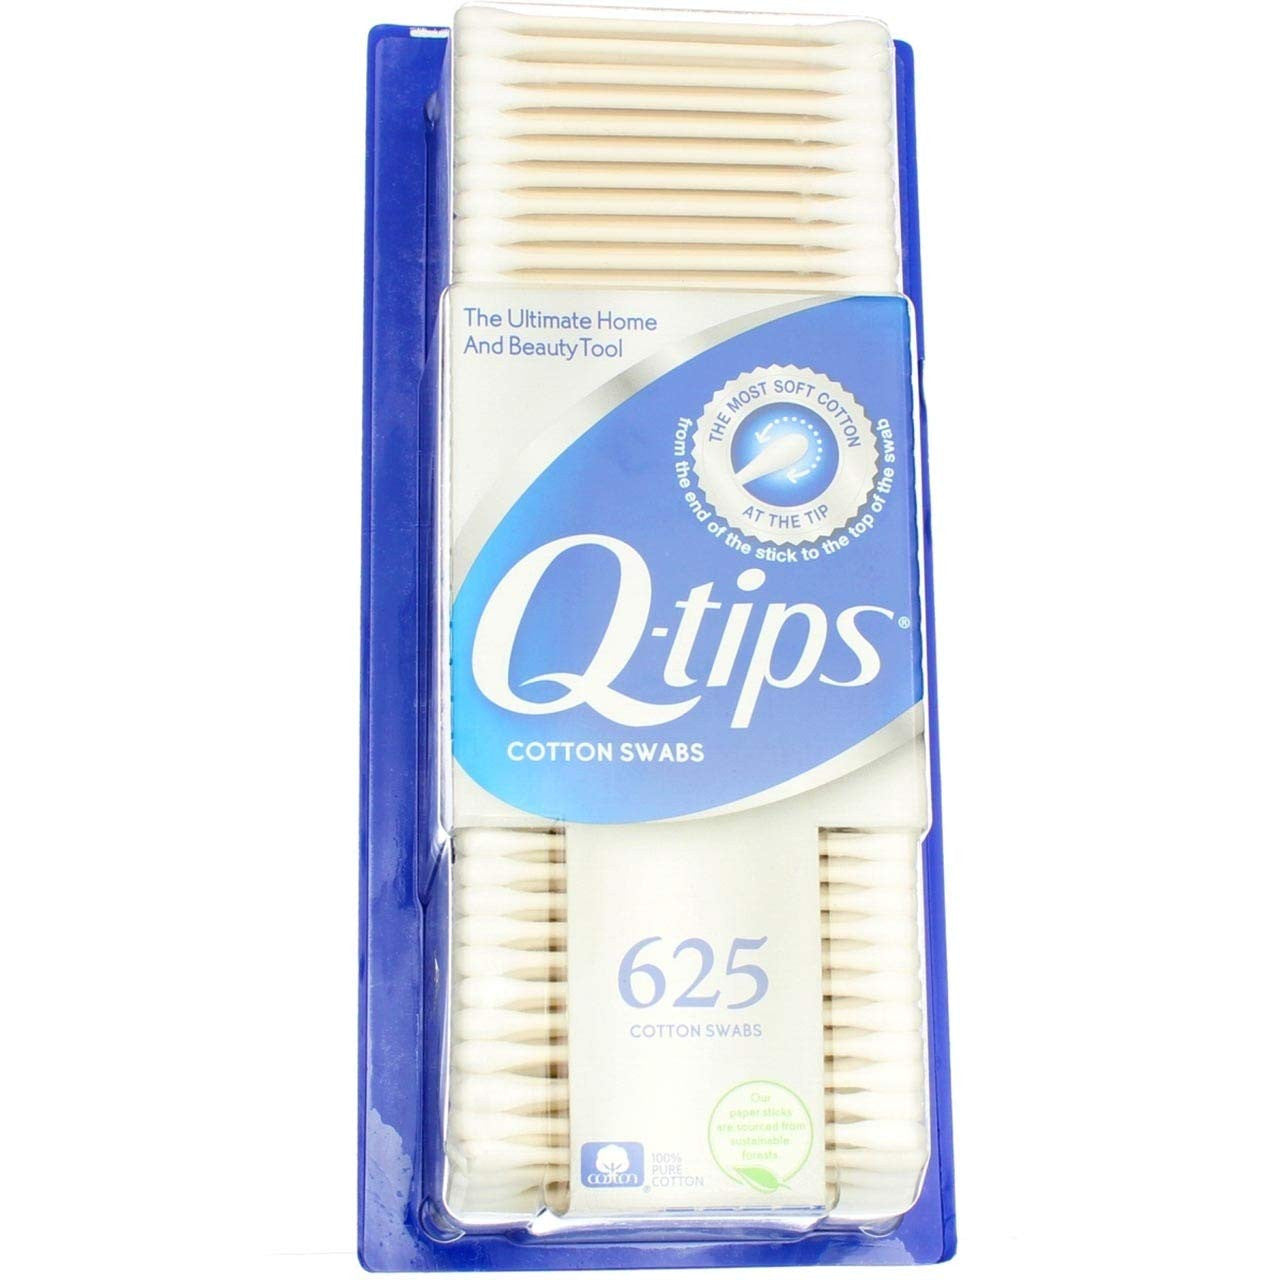 Q-tips Cotton Swabs Travel size, 30 Count, (Pack of 16)